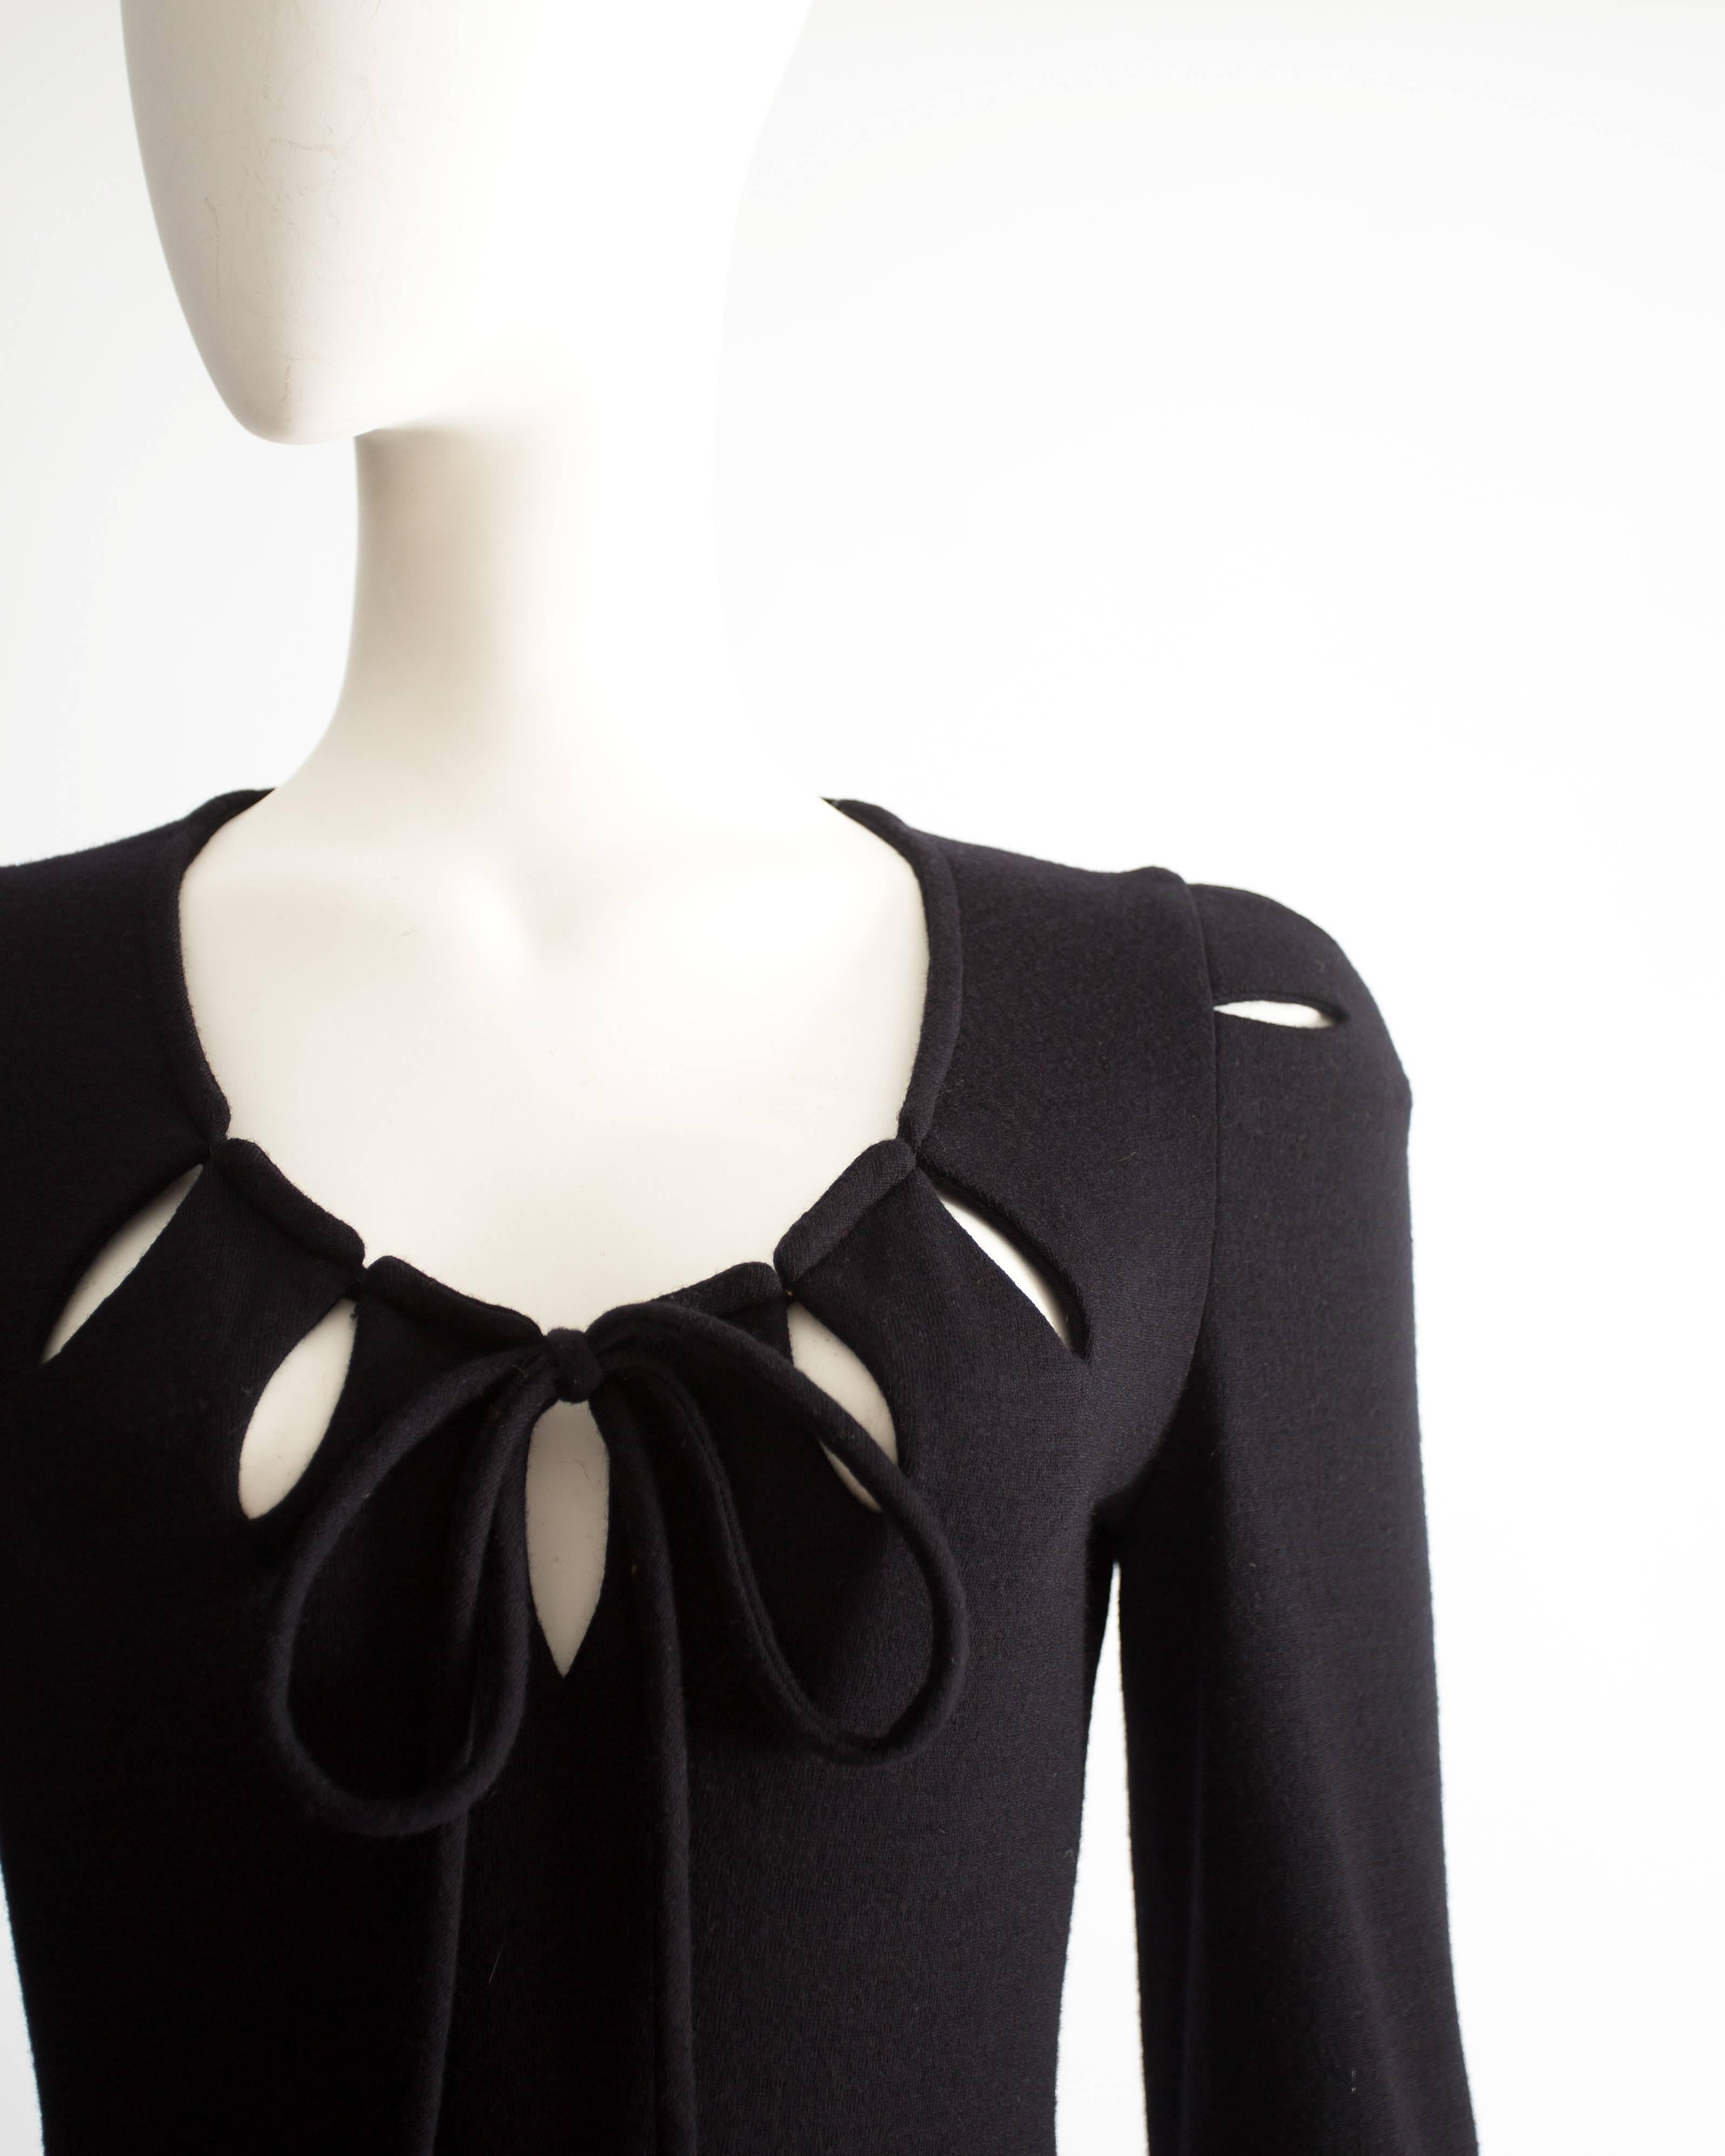 Black Ossie Clark black wool mid-length dress with cut-outs, Circa 1973